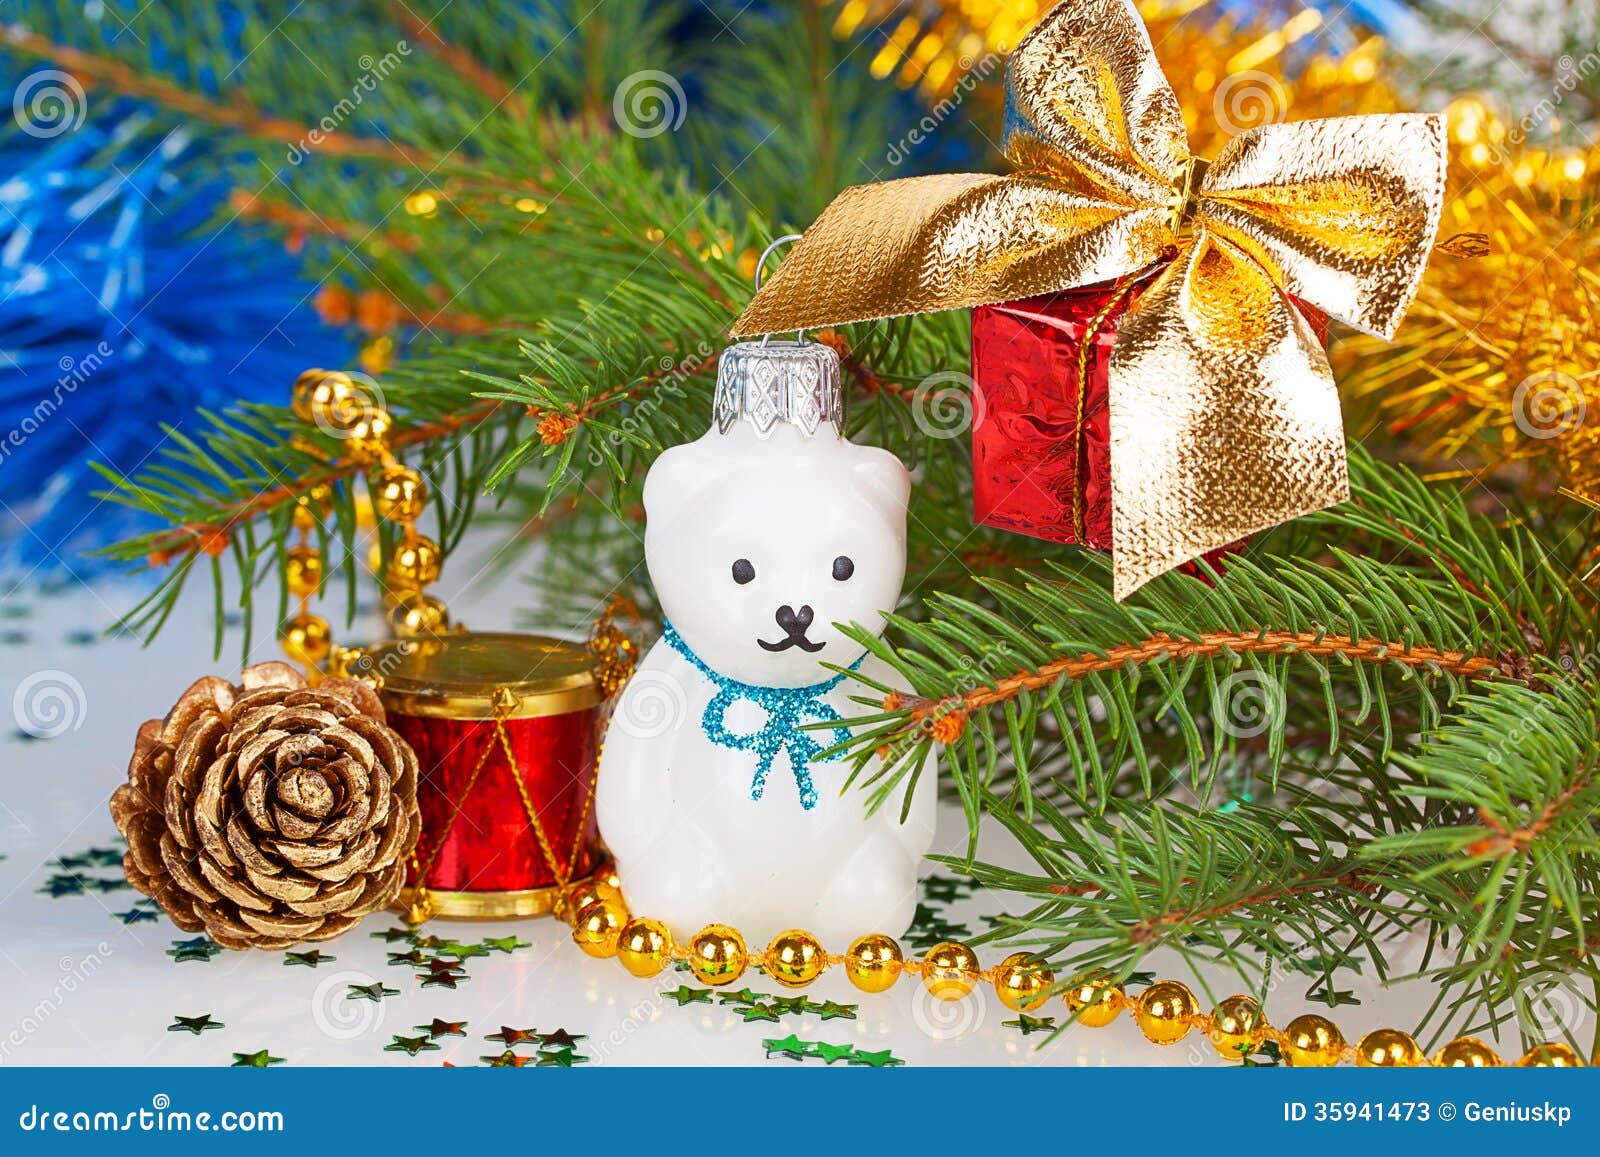 Christmas White Teddy Bear with Decorations Stock Image - Image of gift ...